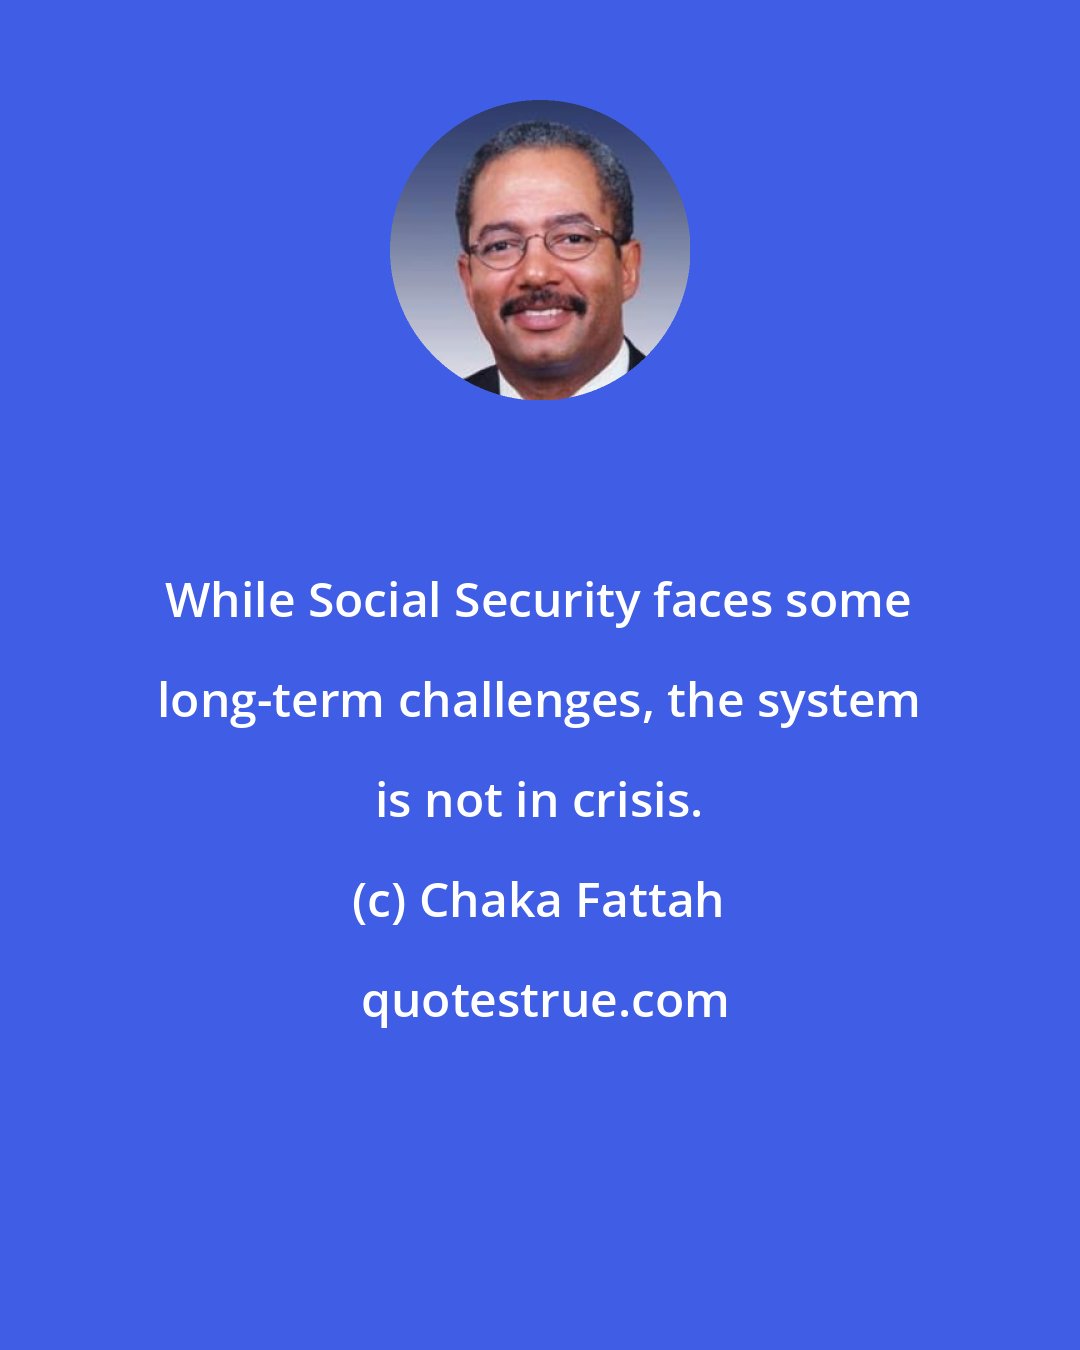 Chaka Fattah: While Social Security faces some long-term challenges, the system is not in crisis.